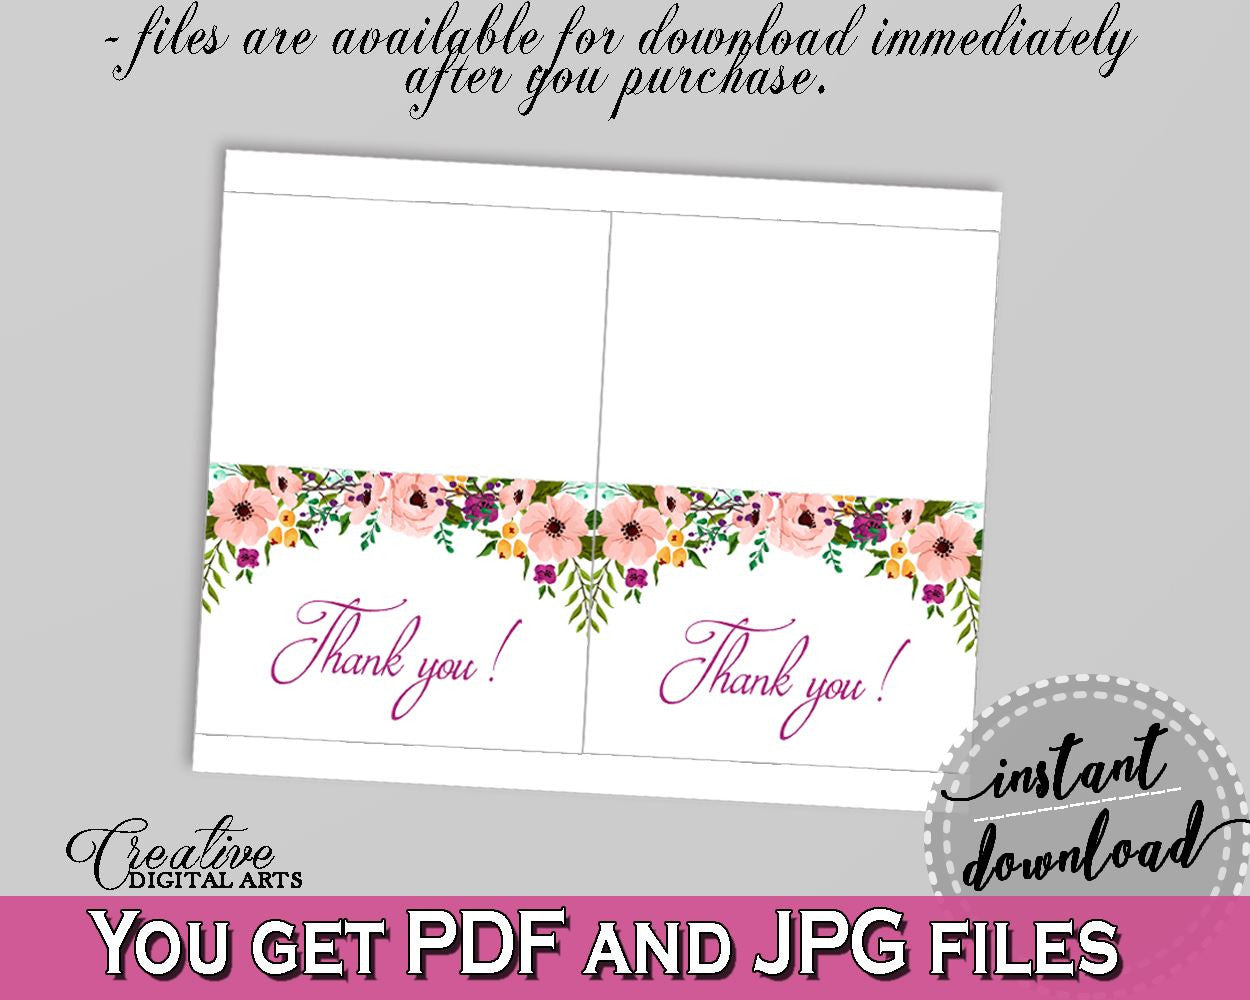 White And Pink Watercolor Flowers Bridal Shower Theme: Thank You Card - thanks for coming, pink flowers shower, customizable files - 9GOY4 - Digital Product